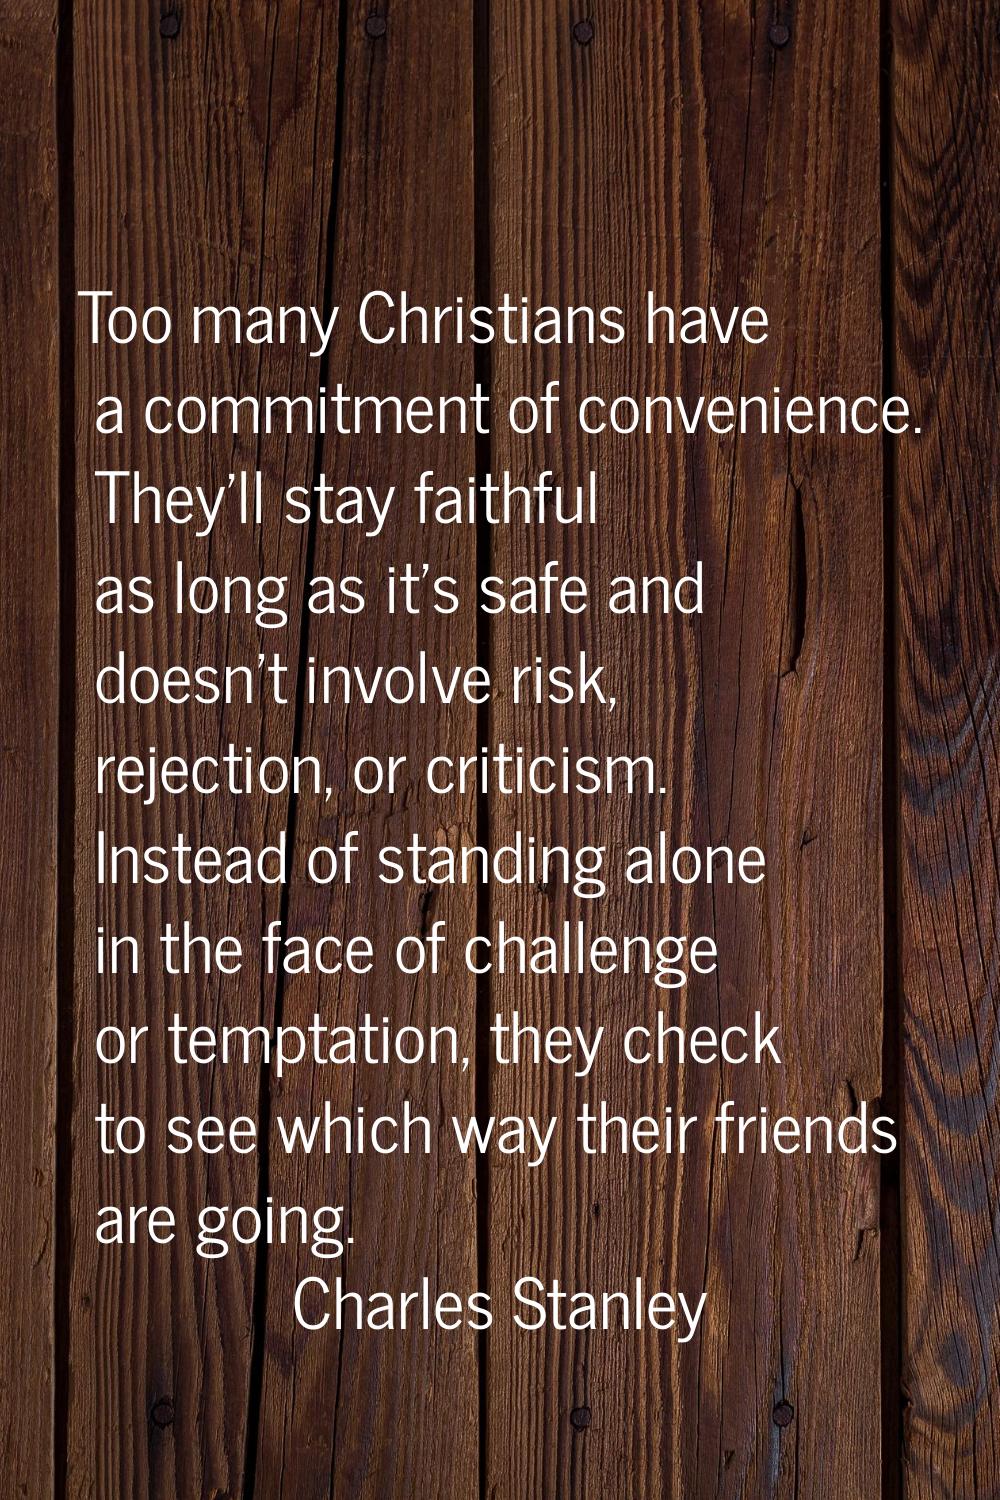 Too many Christians have a commitment of convenience. They'll stay faithful as long as it's safe an